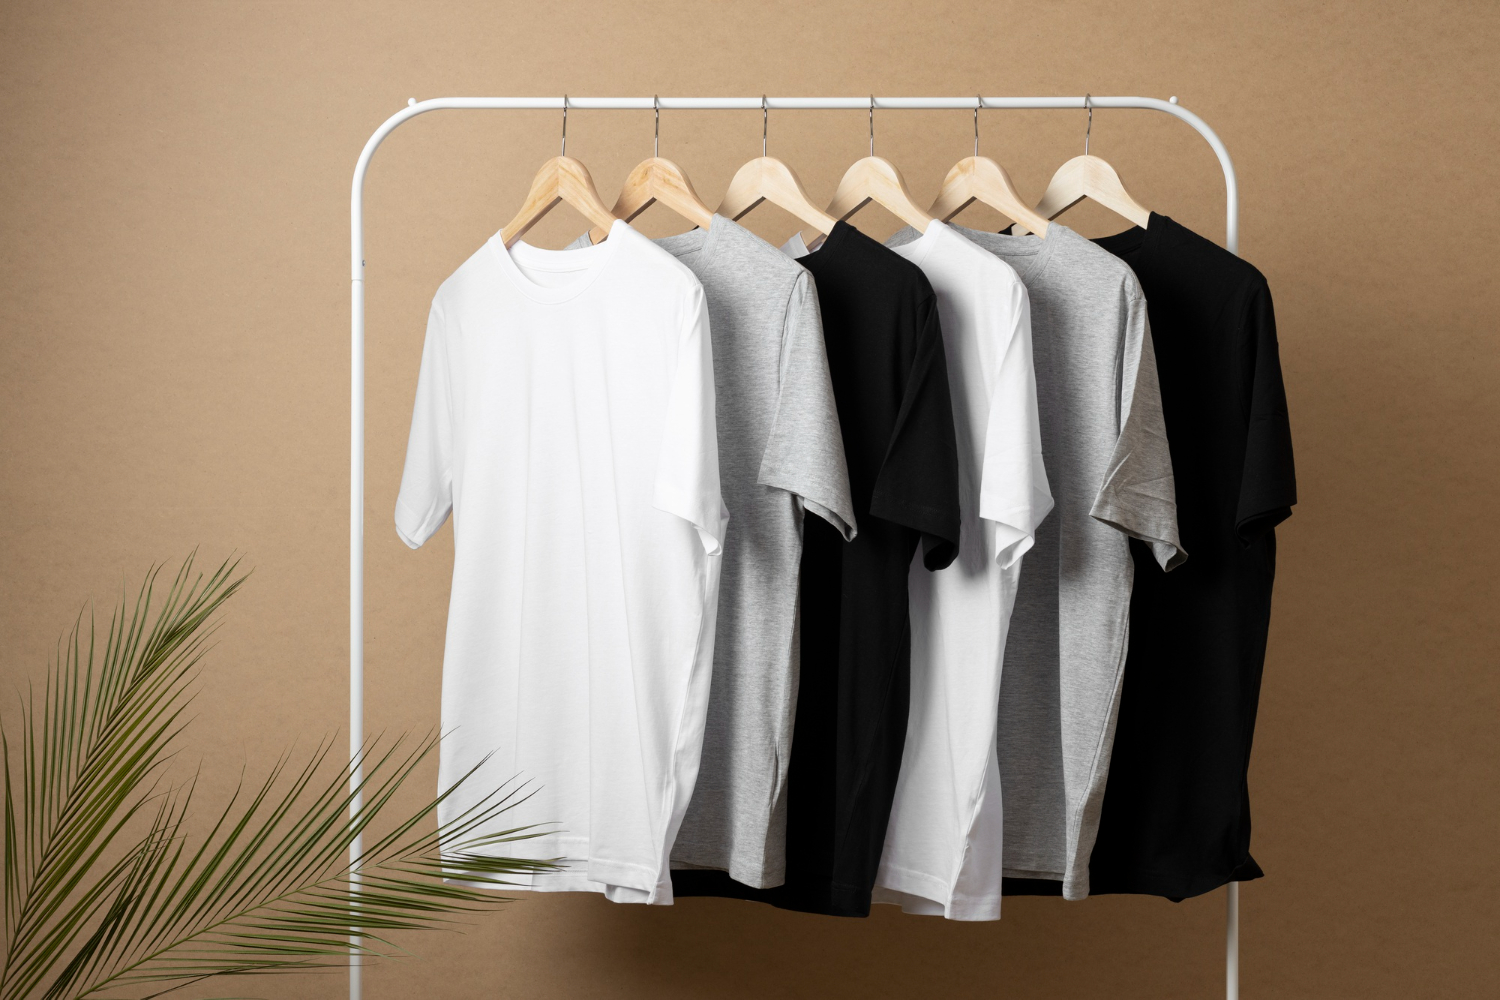 5 Reasons Why Blank T-Shirts Are a Wardrobe Essential